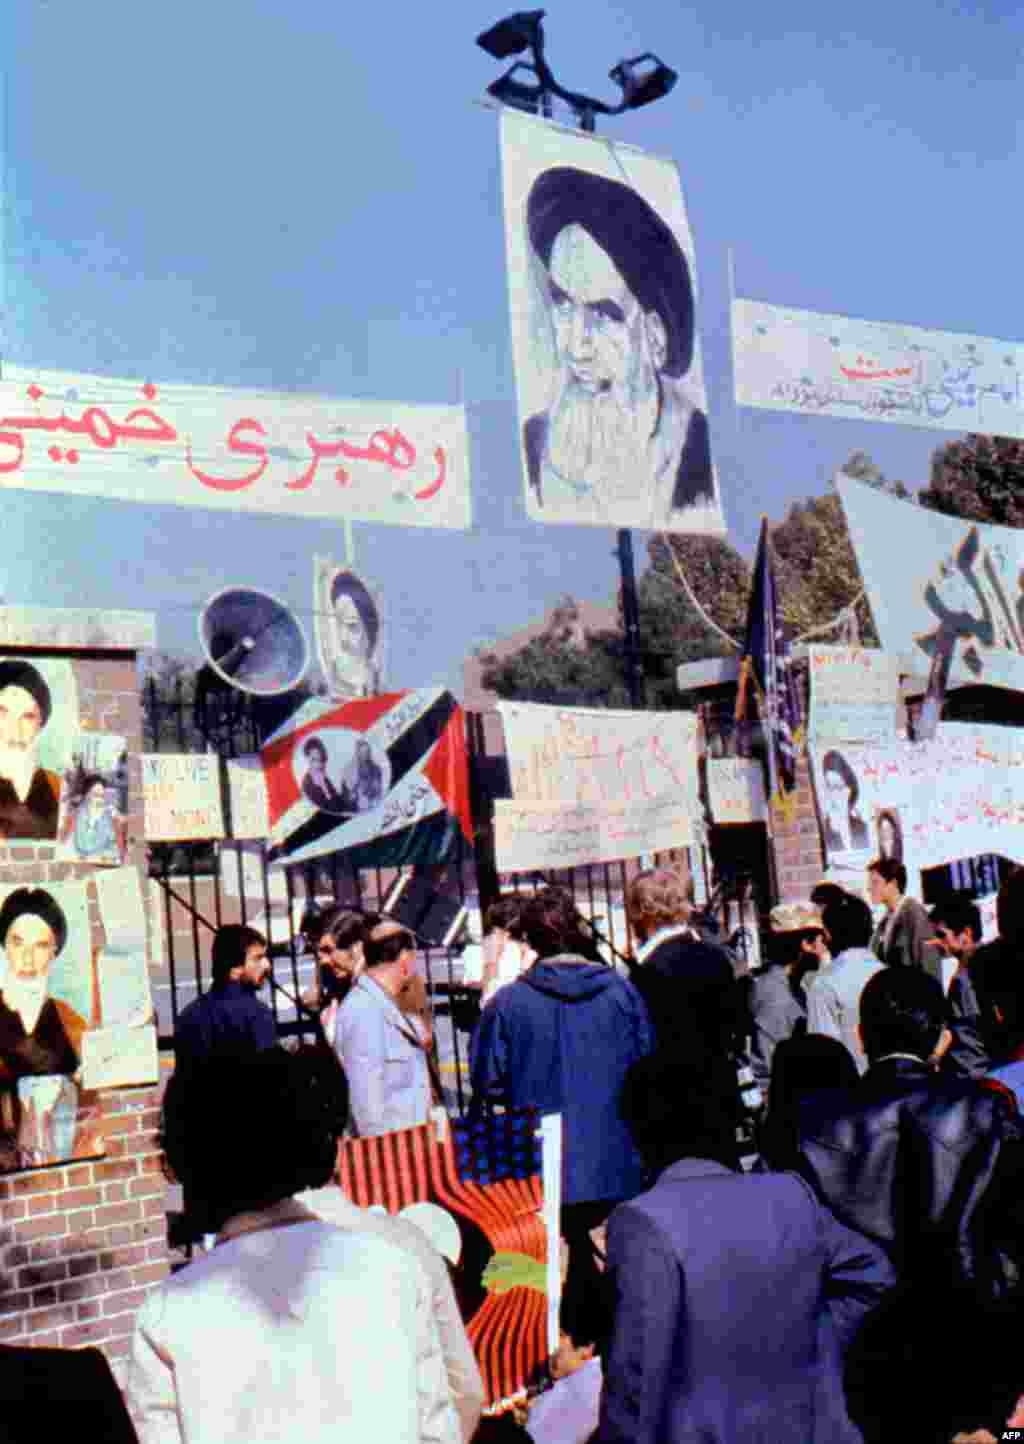 Iran -- Anti-American posters fasted on the wall of the US Embassy compound in Tehran 17Nov1979 - IRAN, Tehran : Anti-American posters fasted on the wall of the U.S. Embassy compound,17 November 1979. The fanatical followers of the Ayatollah Khomeini stormed the United States Embassy, 04 November 1979 in Tehran, occupied the building and took nearly 100 embassy staff and Marines hostages. 